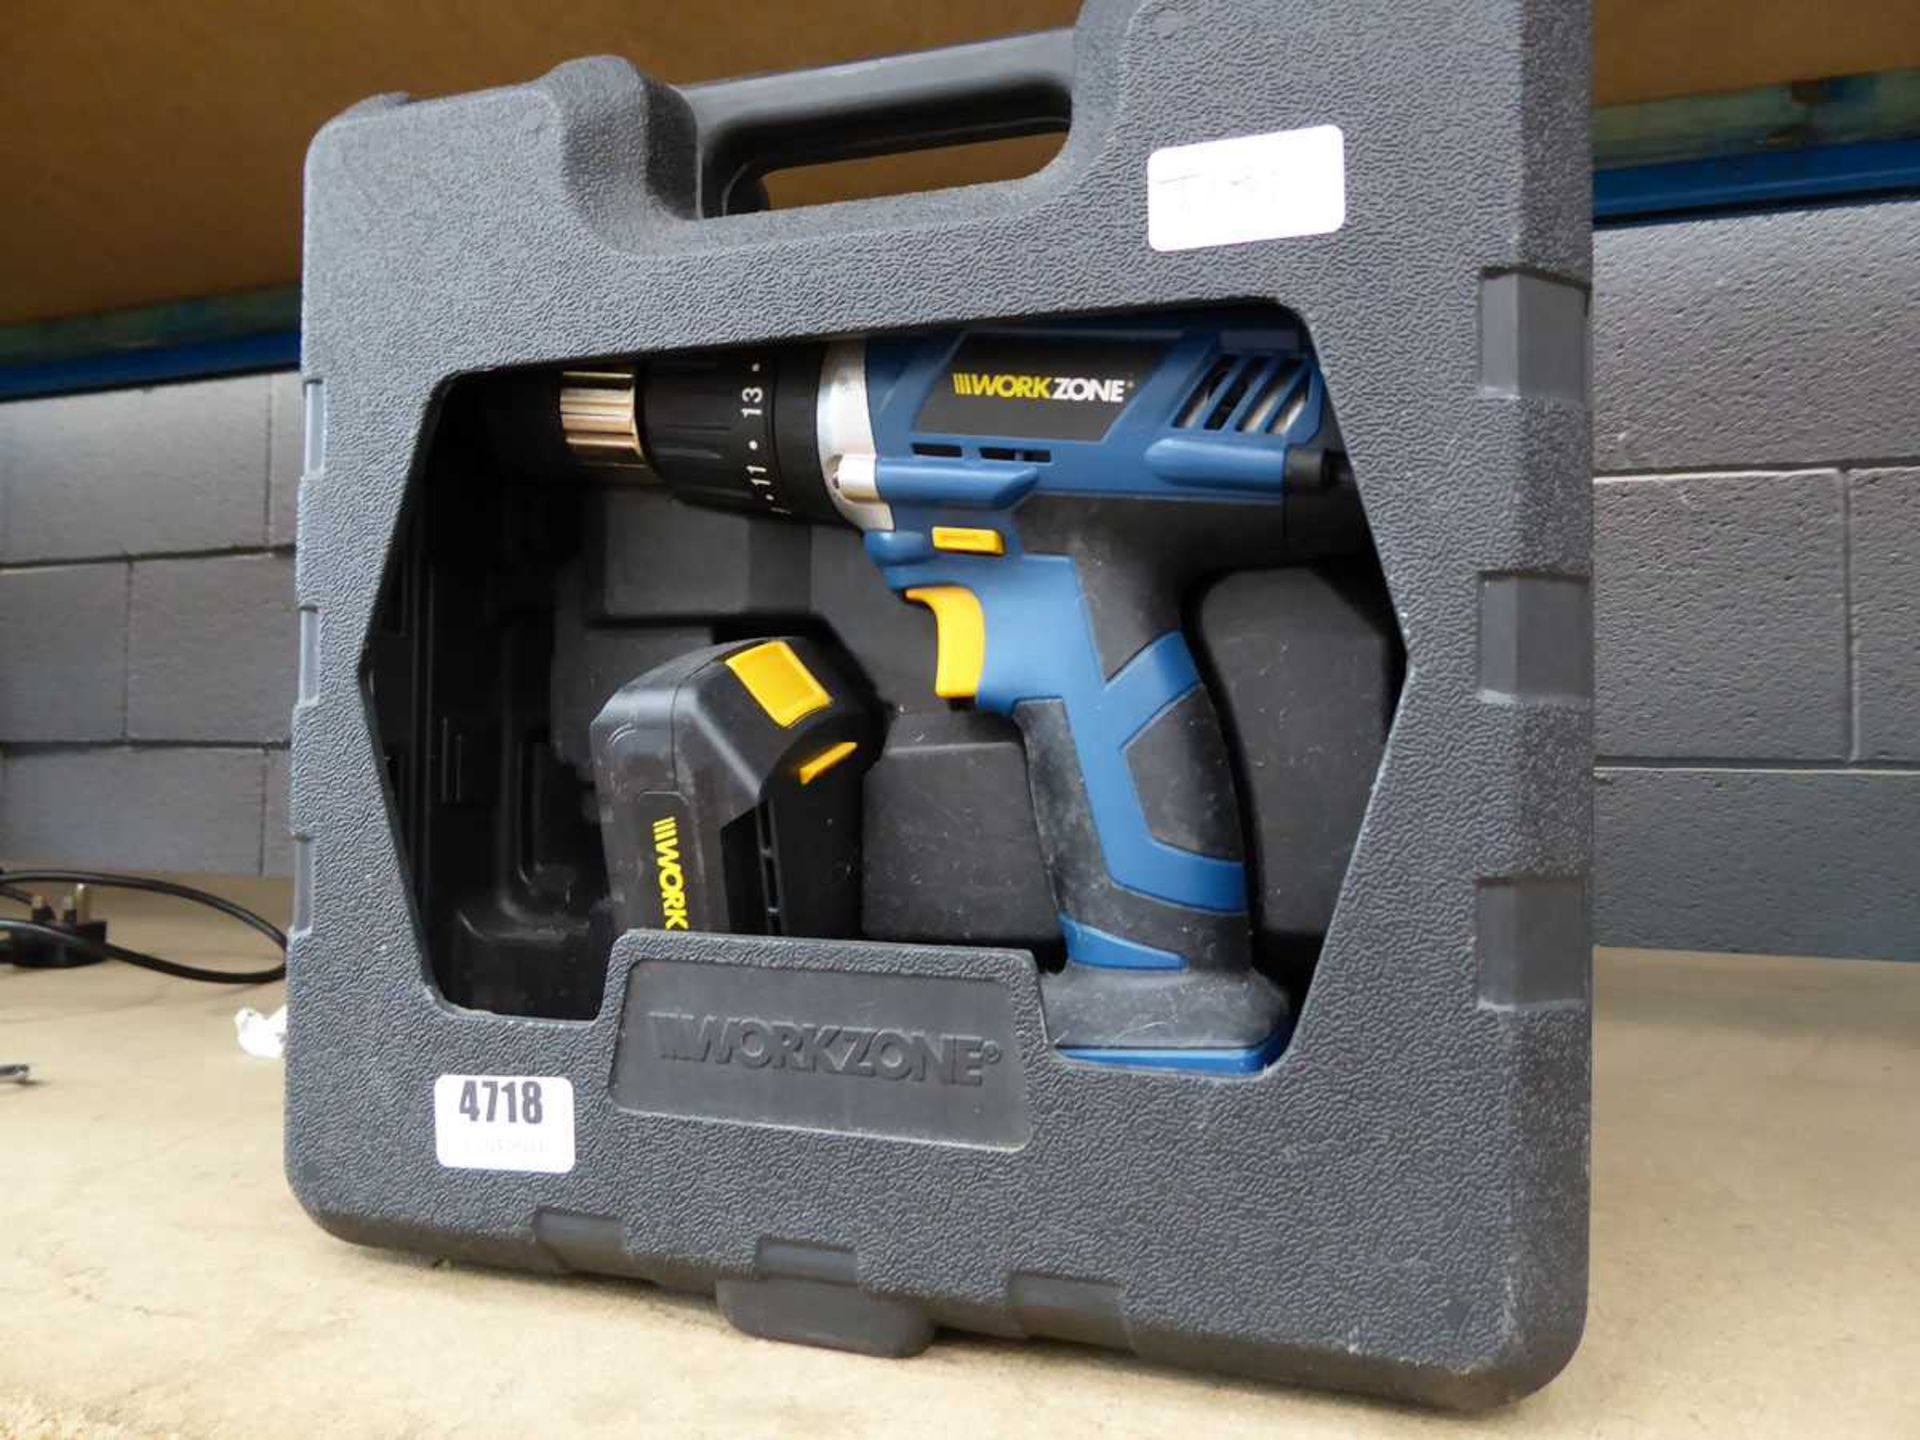 Workzone battery drill with 2 batteries no charger